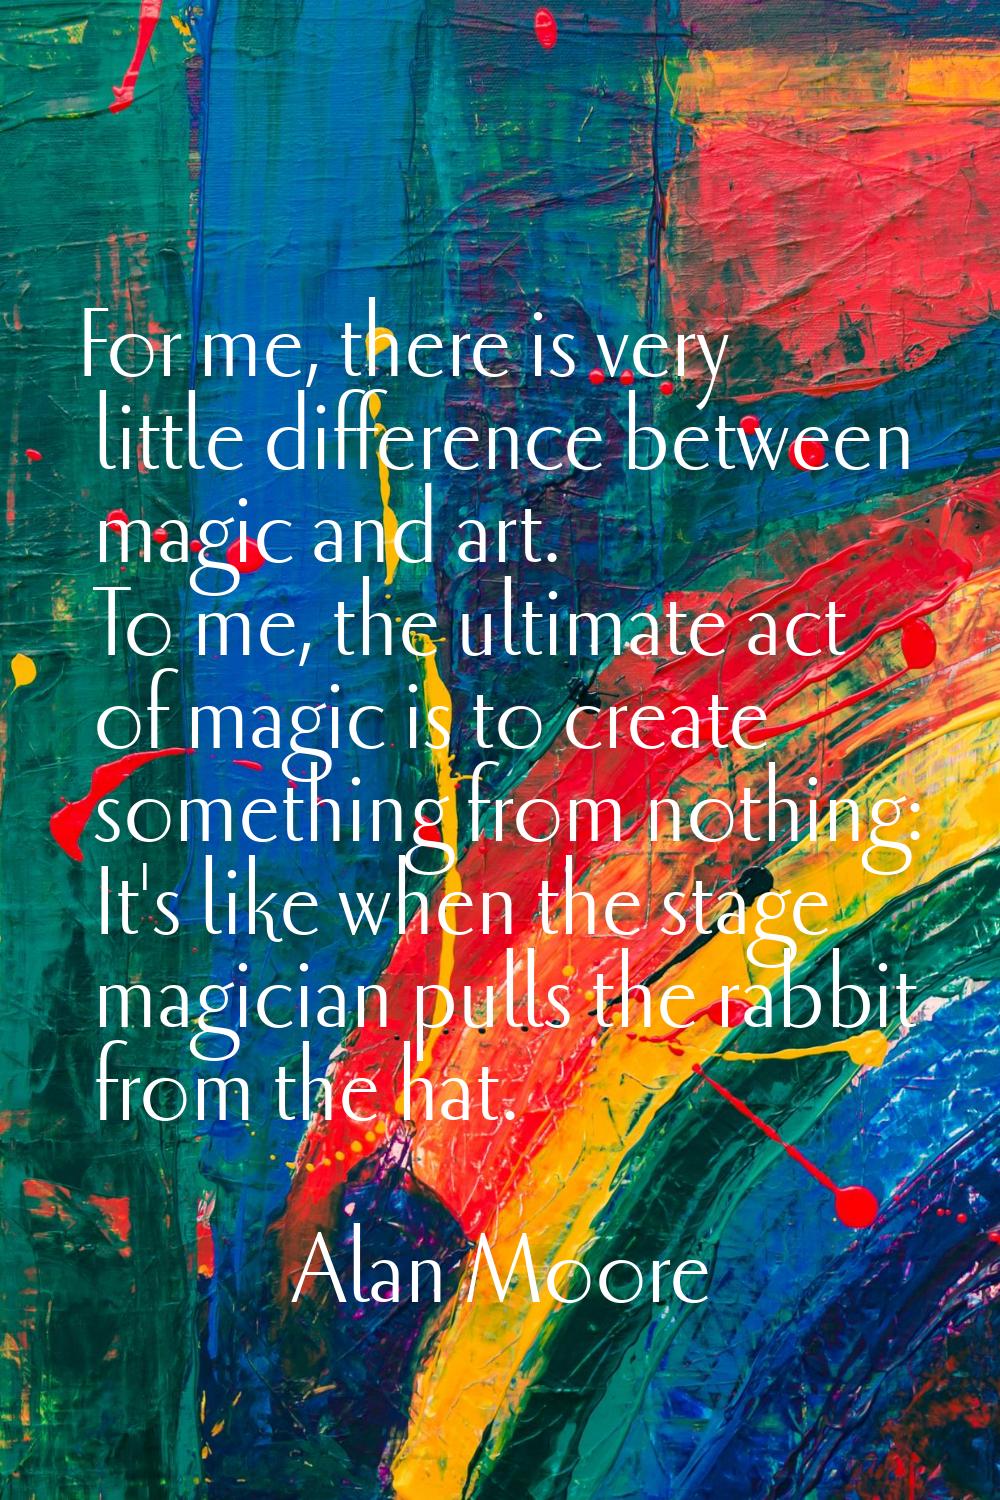 For me, there is very little difference between magic and art. To me, the ultimate act of magic is 